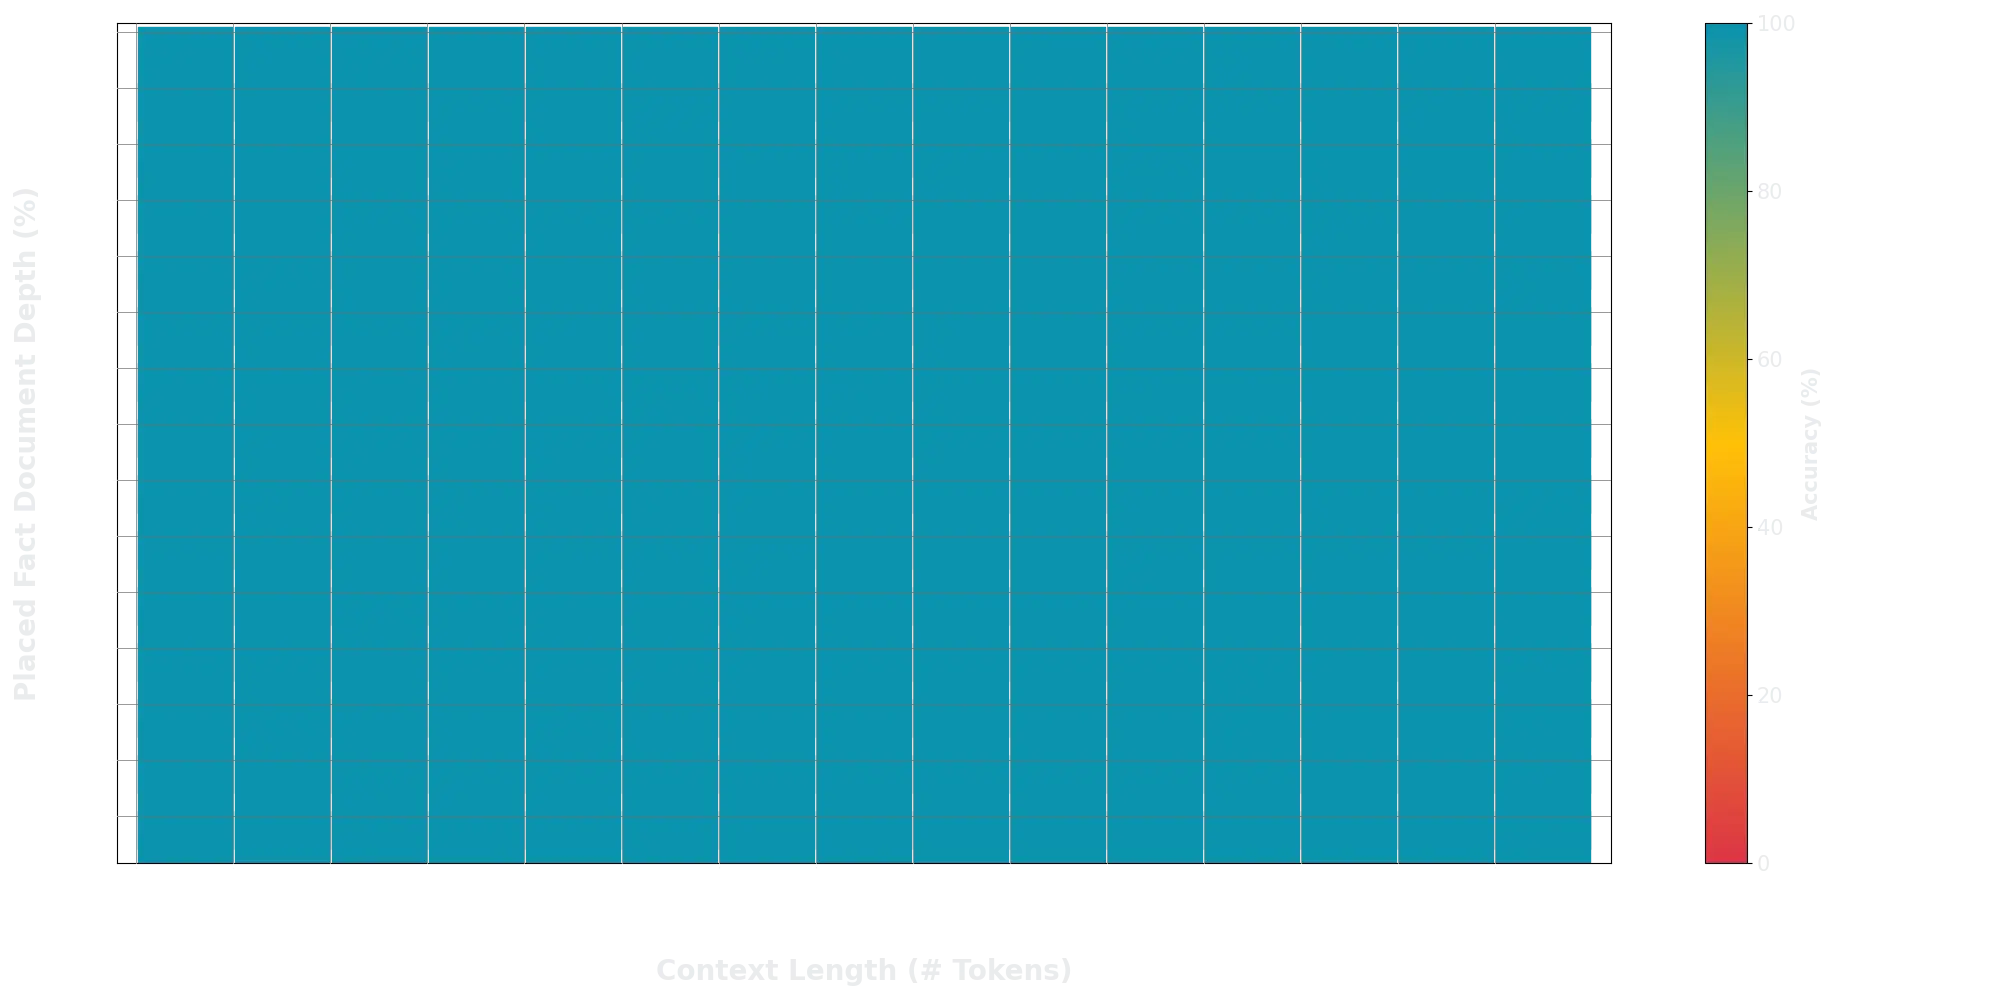 The image shows a graph that visualizes the model's ability to recall information from its context window. The x-axis is the length of the context window and the y-axis is the relative position of the fact to retrieve from the window. We use colors to mark the recall rate. The entire graph is green, which means the recall-rate is 100% for every context window and every placement of the fact to retrieve.